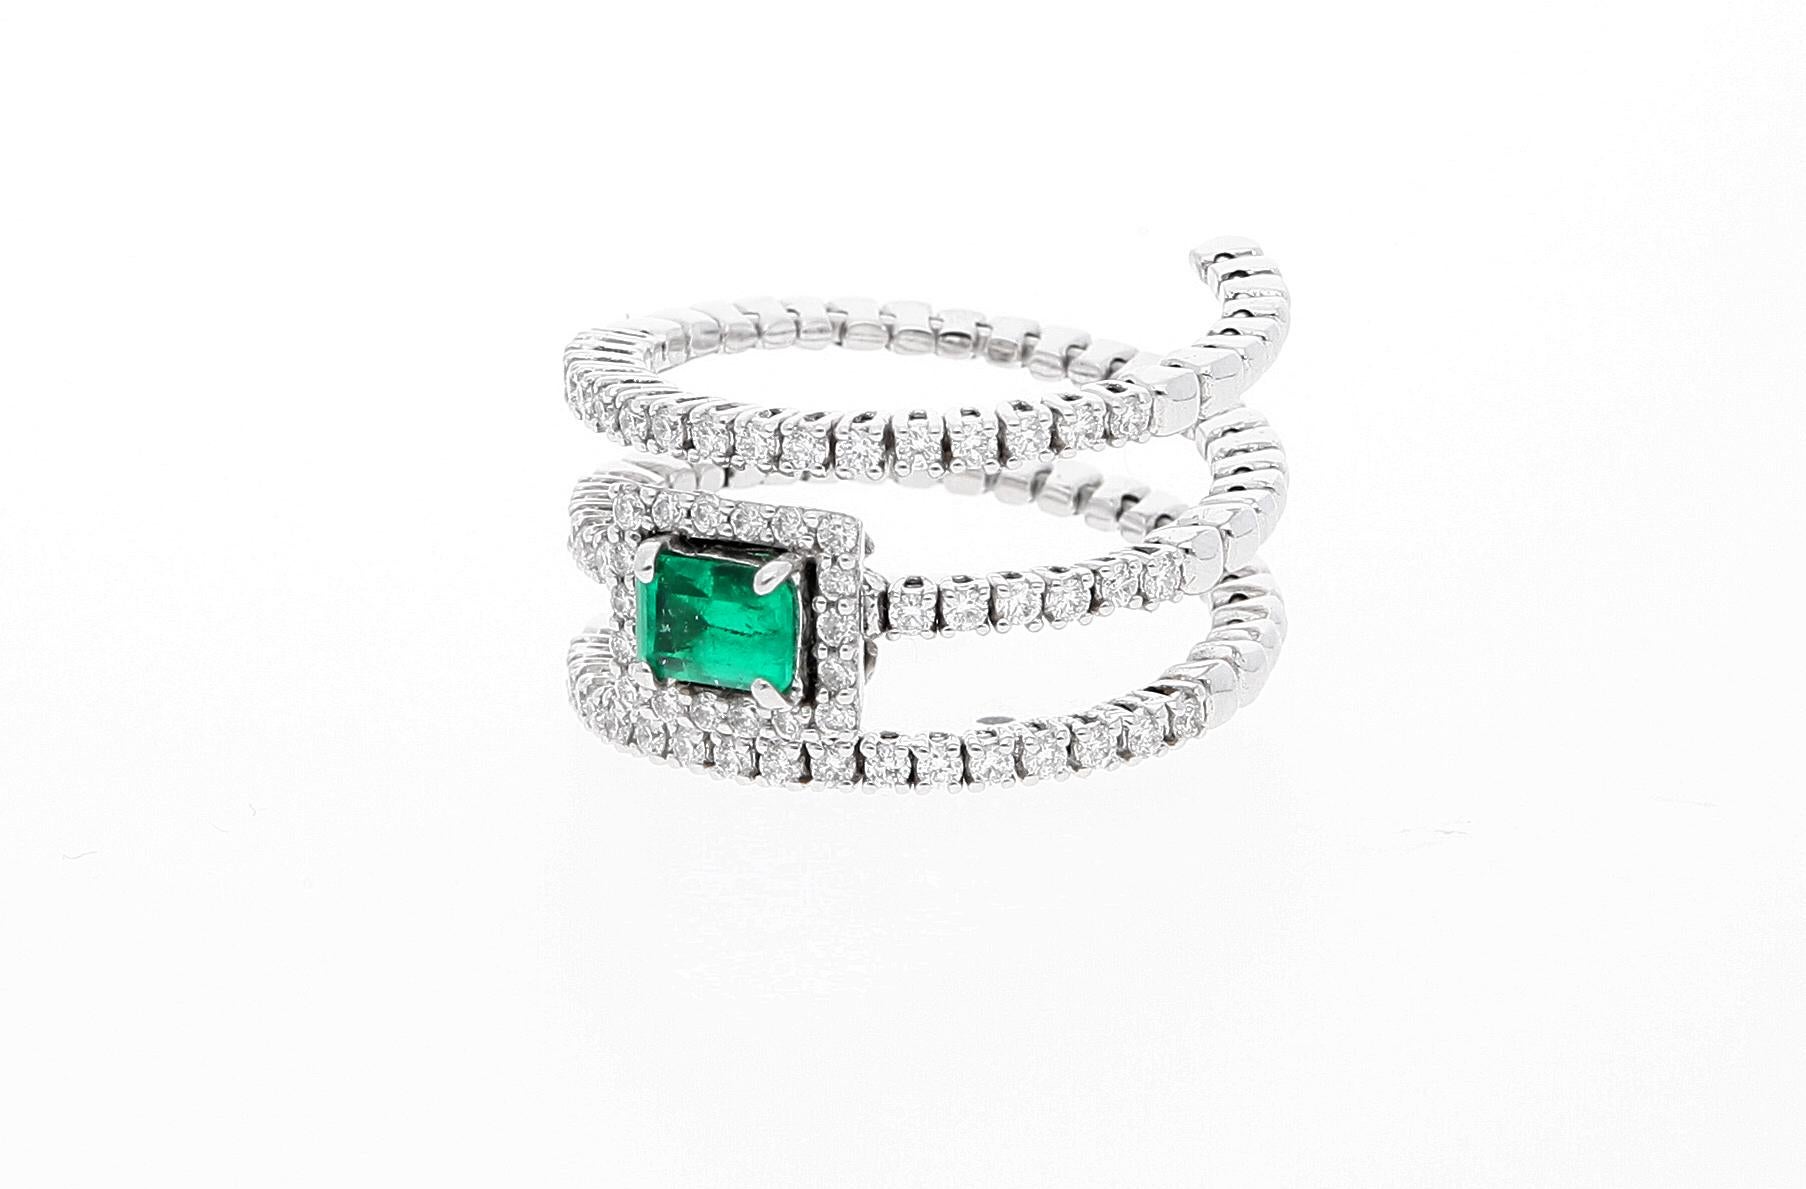 Emerald Cut 18 Karat White Gold Extendable Ring with Diamonds and Emerald